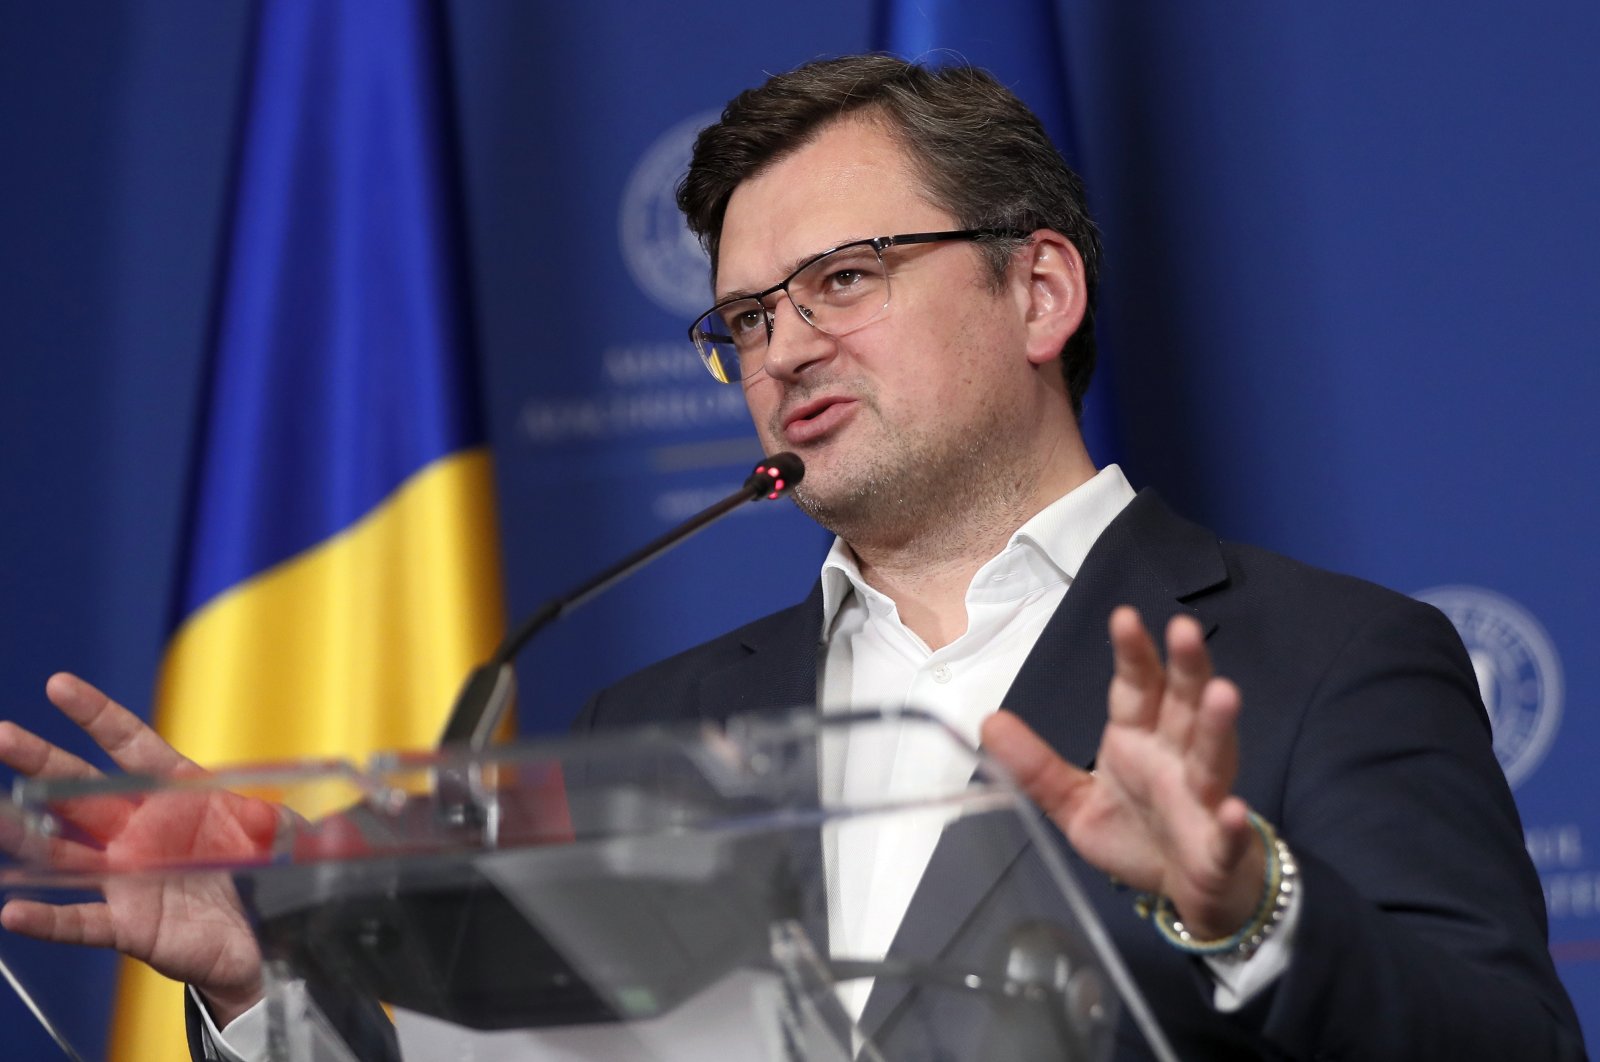 Ukrainian Foreign Minister Dmytro Kuleba addresses the media during a joint news conference that followed a meeting with his Romanian counterpart, Bucharest, Romania, April 22, 2022. (EPA File Photo)